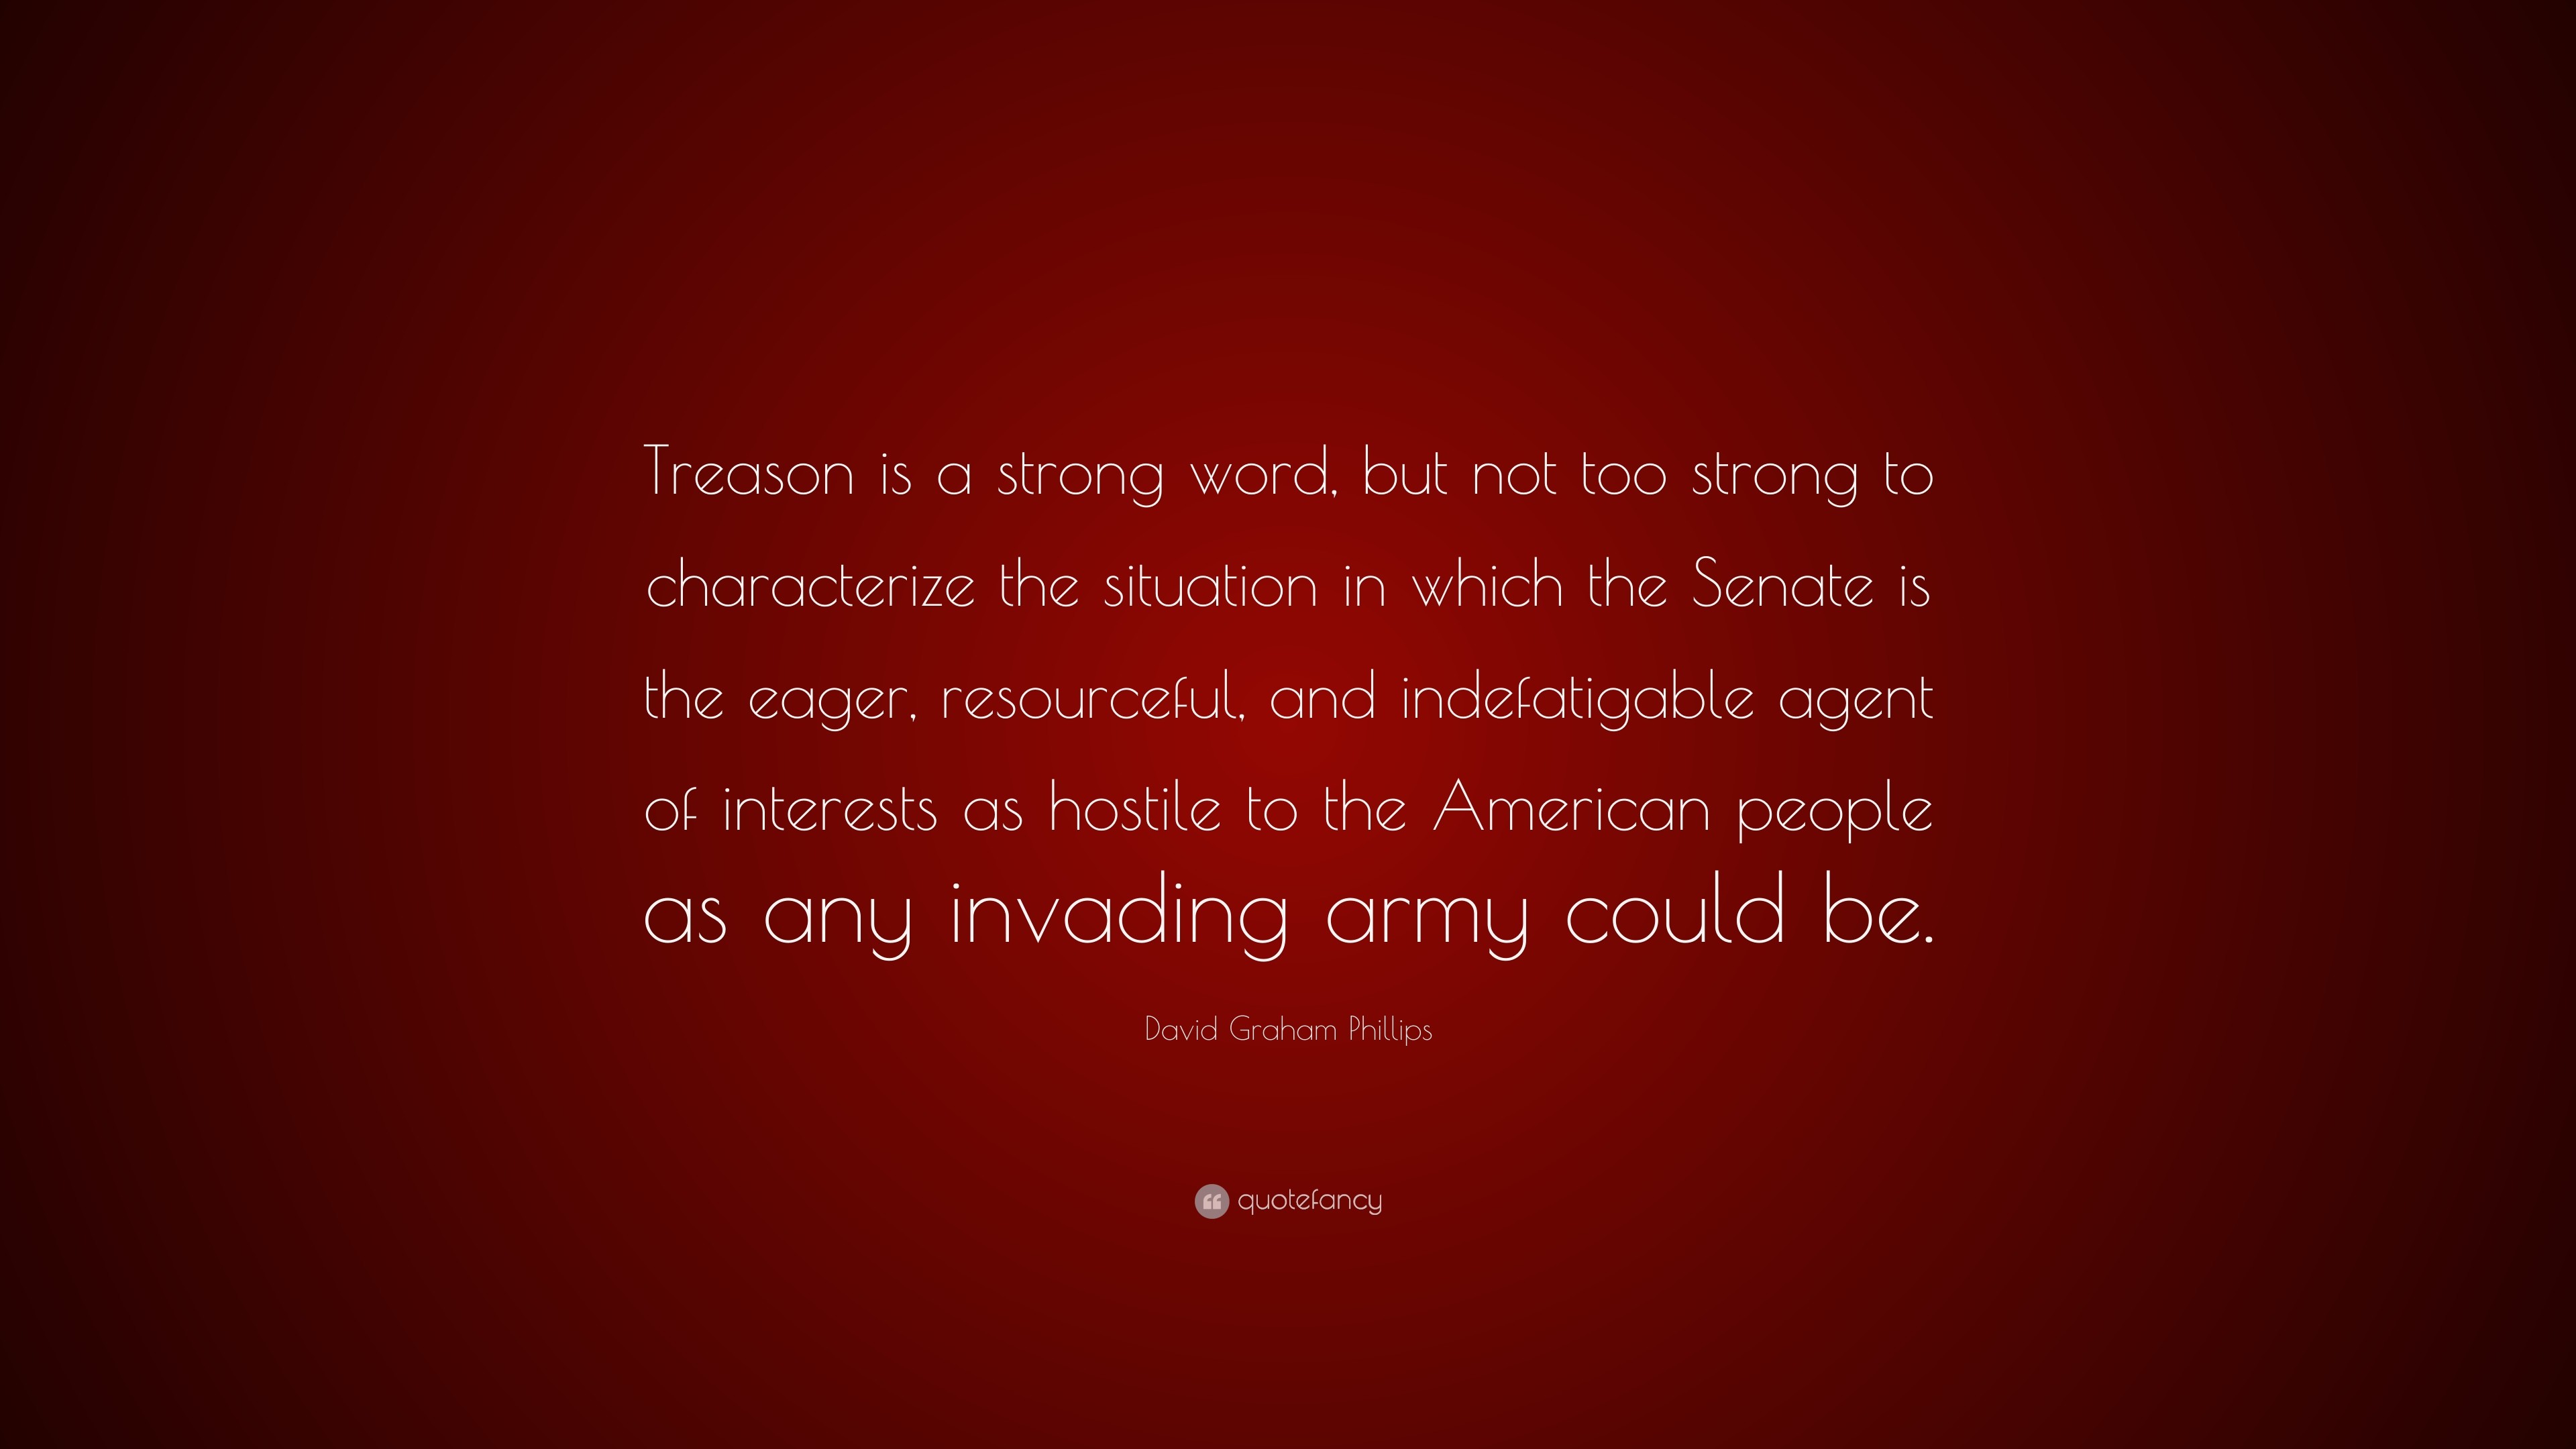 3840x2160 David Graham Phillips Quote: “Treason is a strong word, but not too strong